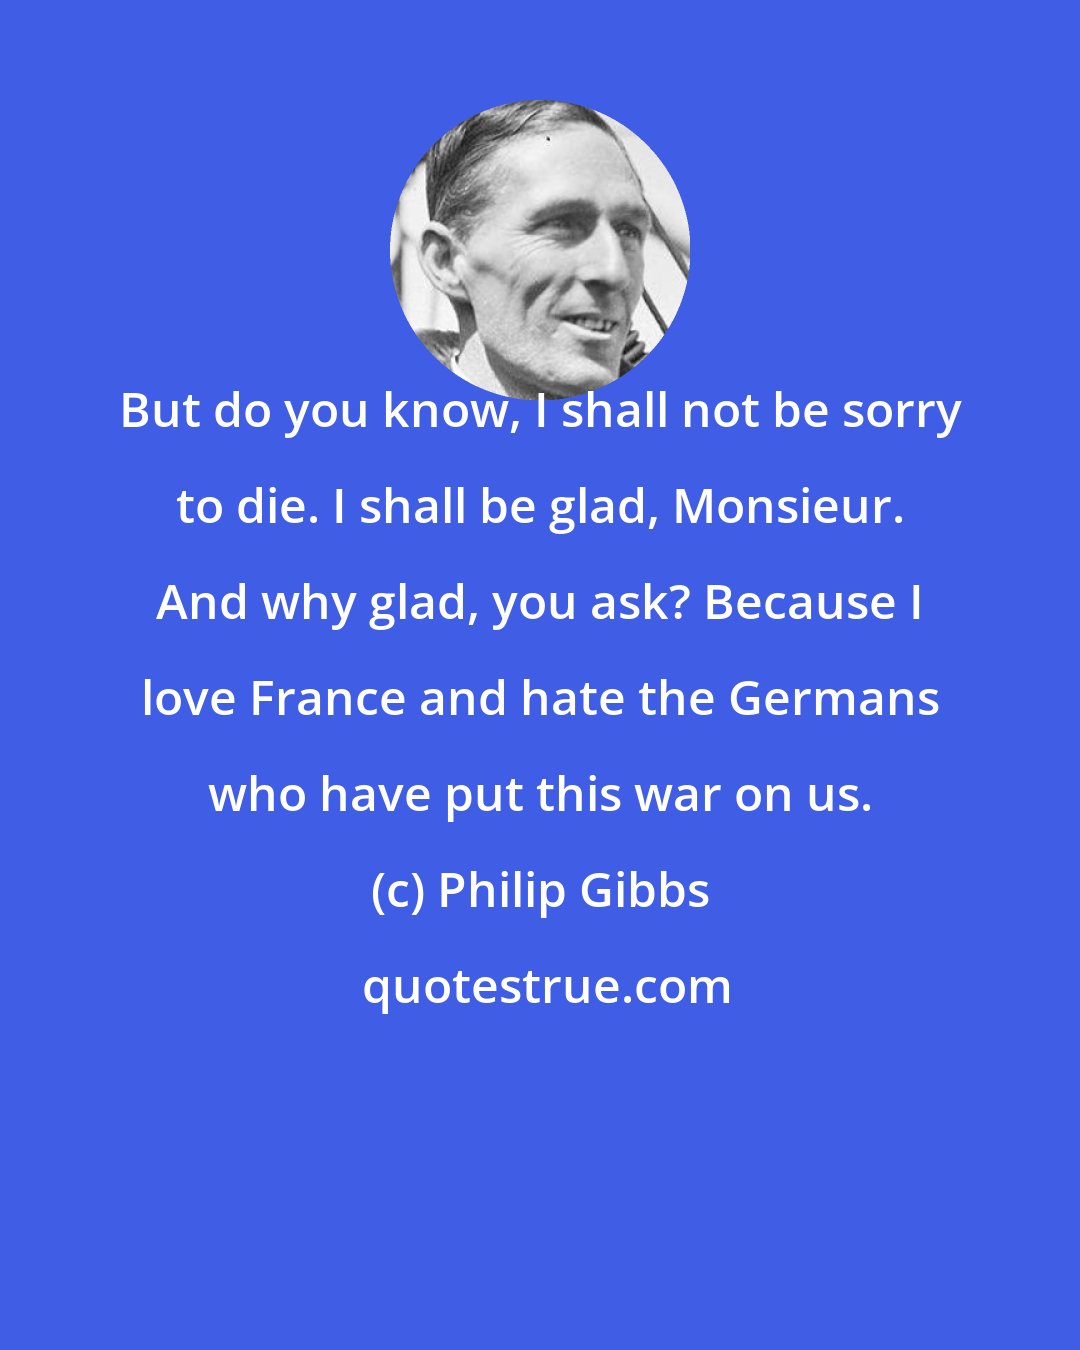 Philip Gibbs: But do you know, I shall not be sorry to die. I shall be glad, Monsieur. And why glad, you ask? Because I love France and hate the Germans who have put this war on us.